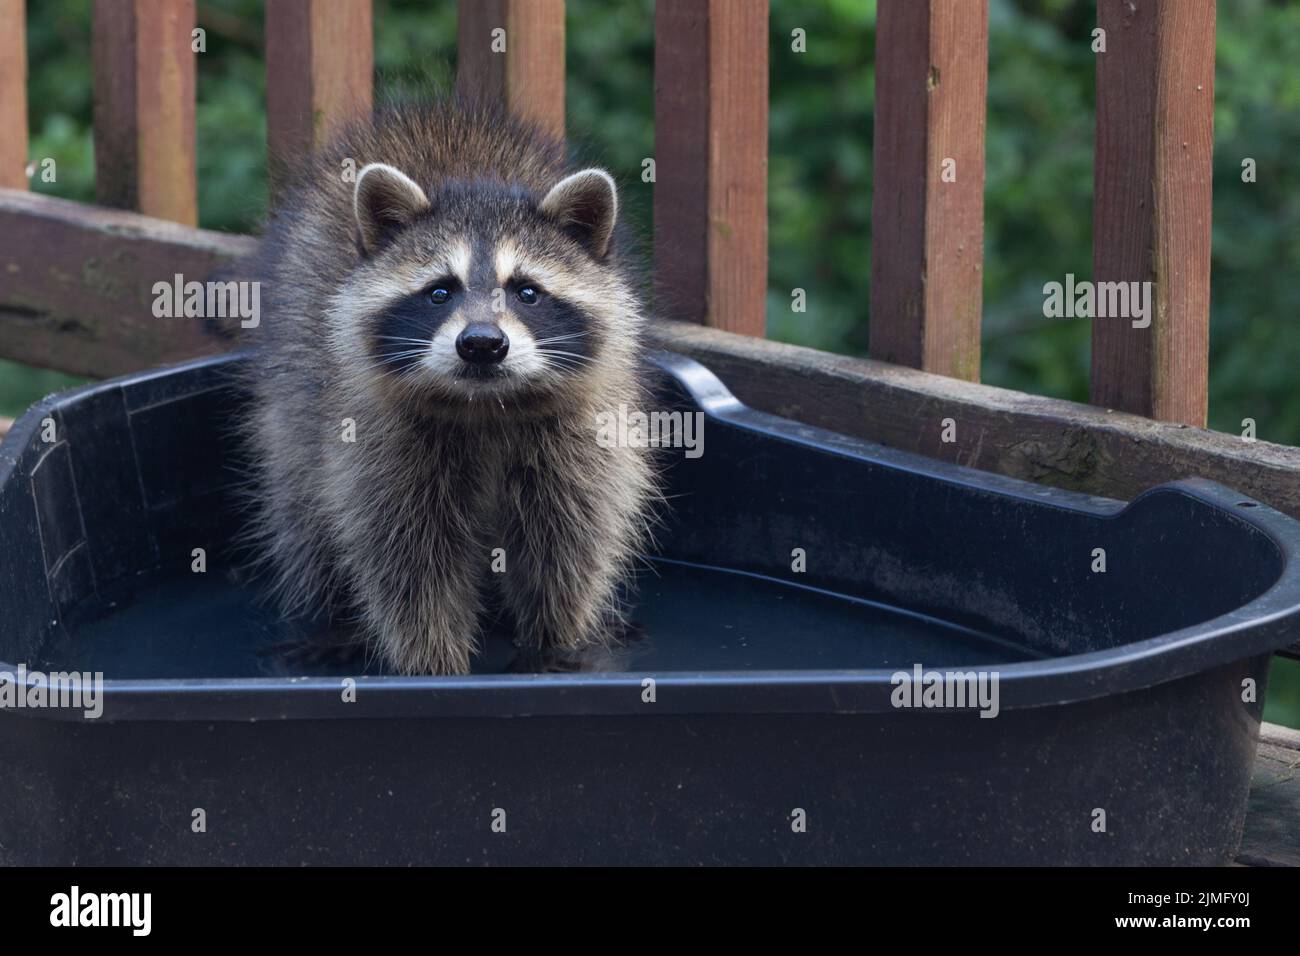 Baby raccoon cooling off in a water trough on a warm evening. Stock Photo